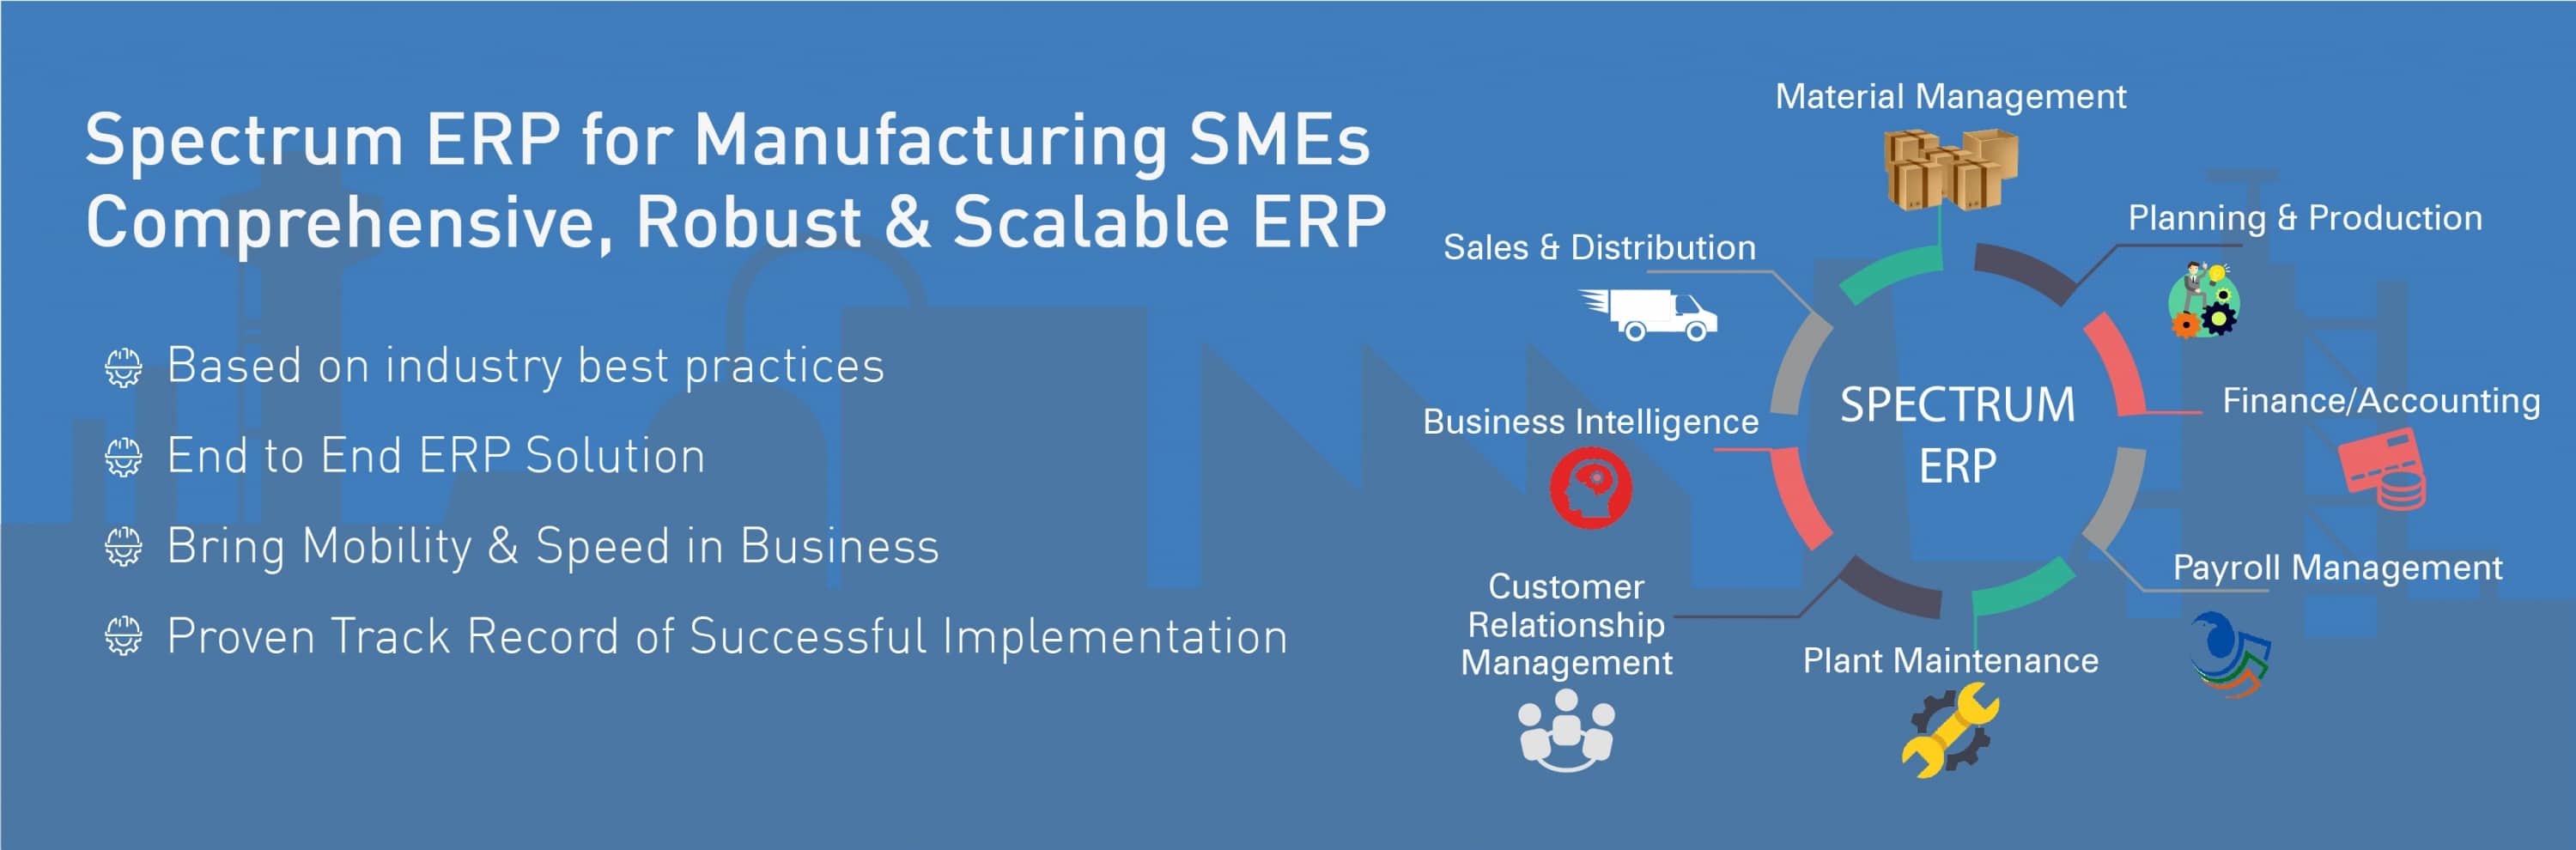 Spectrum ERP - ERP Software for Manufacturing SMEs